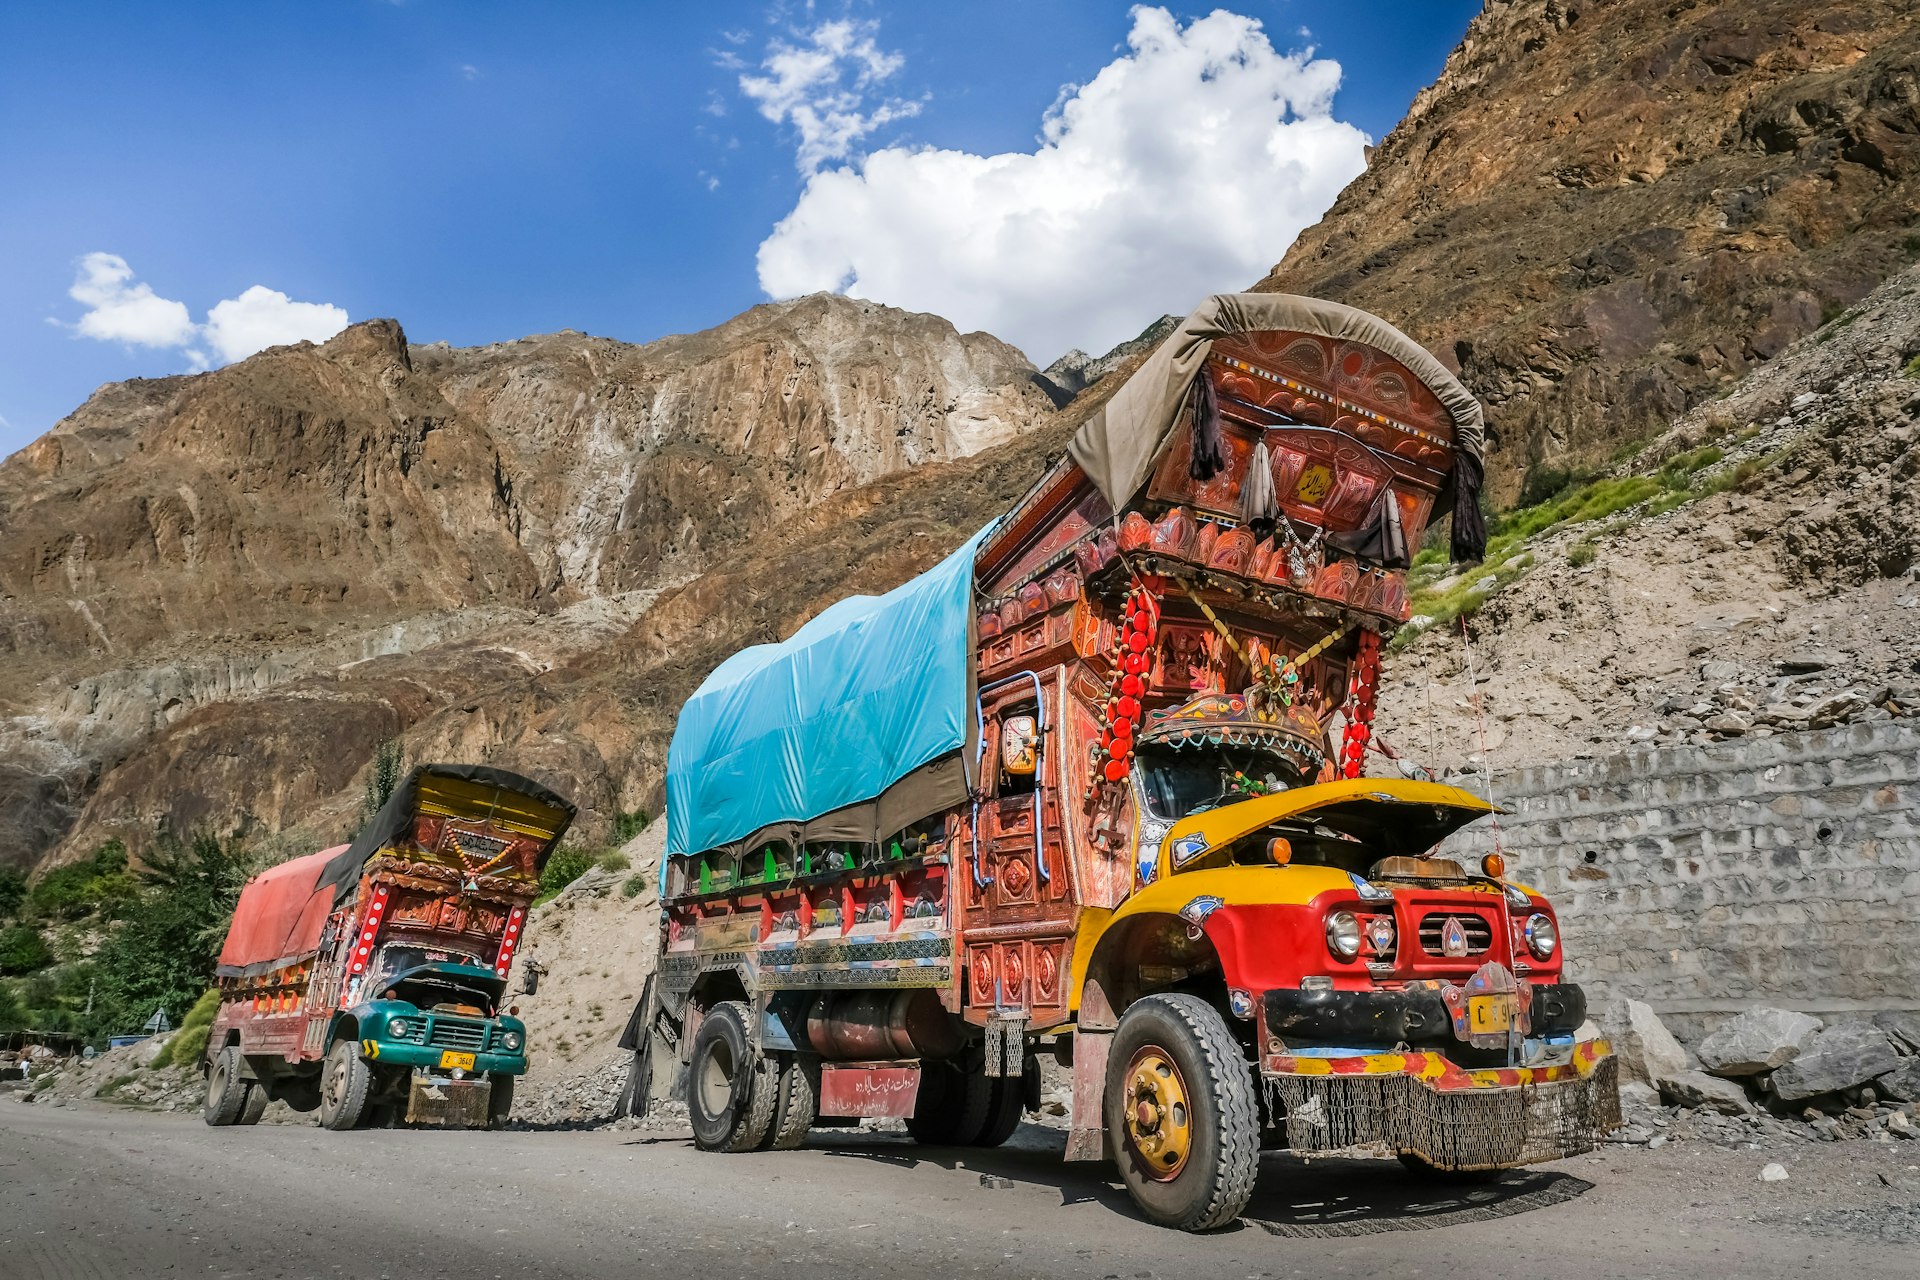 Two large lorries are parked on the side of a mountain road in Northern Pakistan. Both vehicles are lavishly decorated and adorned with flags, bells and tassels.